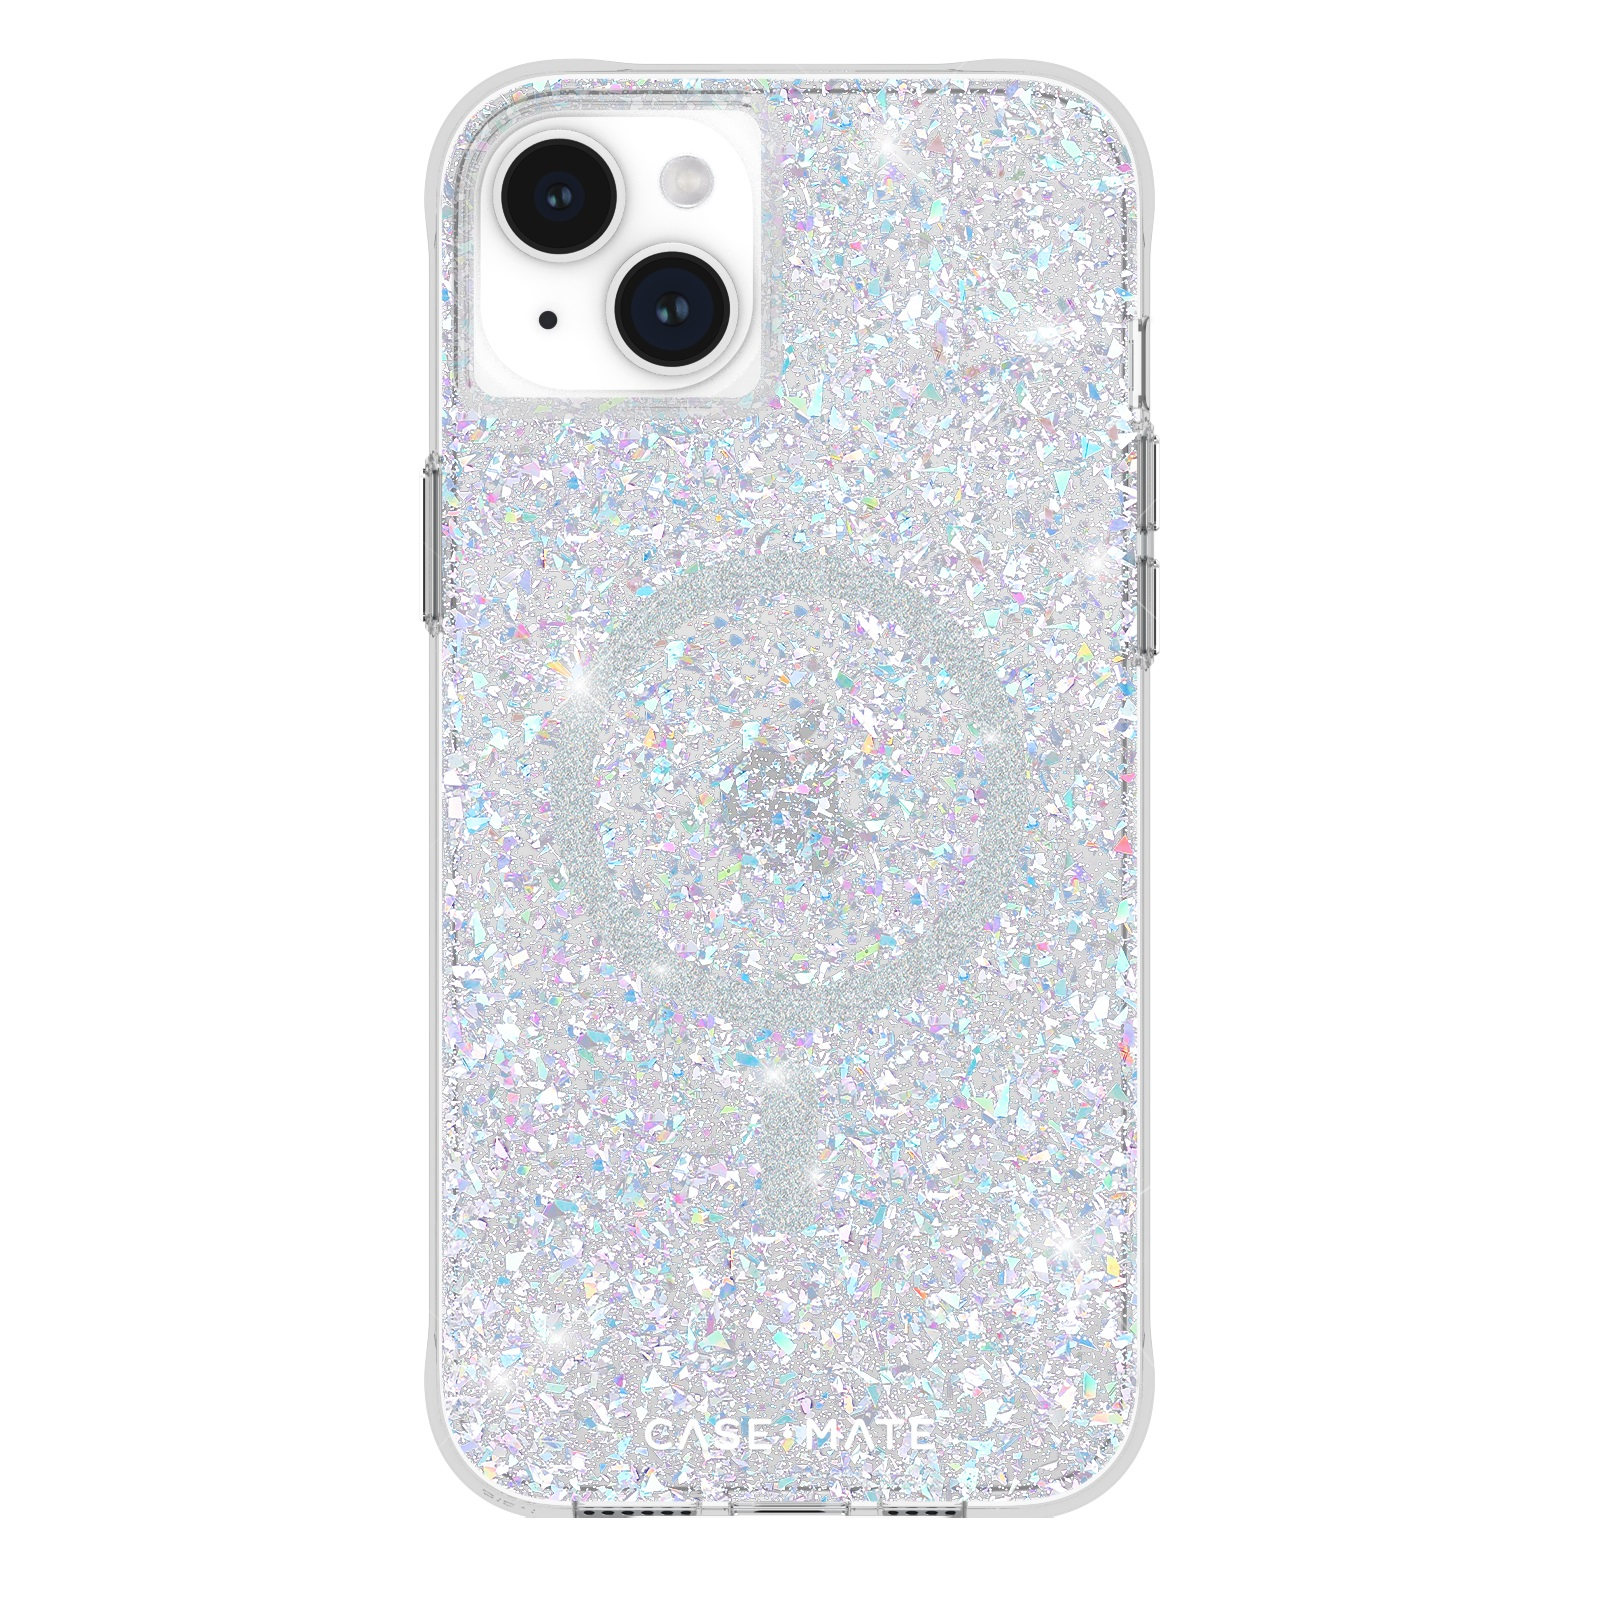 Plus, 15 Twinkle, iPhone Backcover, CASE-MATE Apple, Glitzer